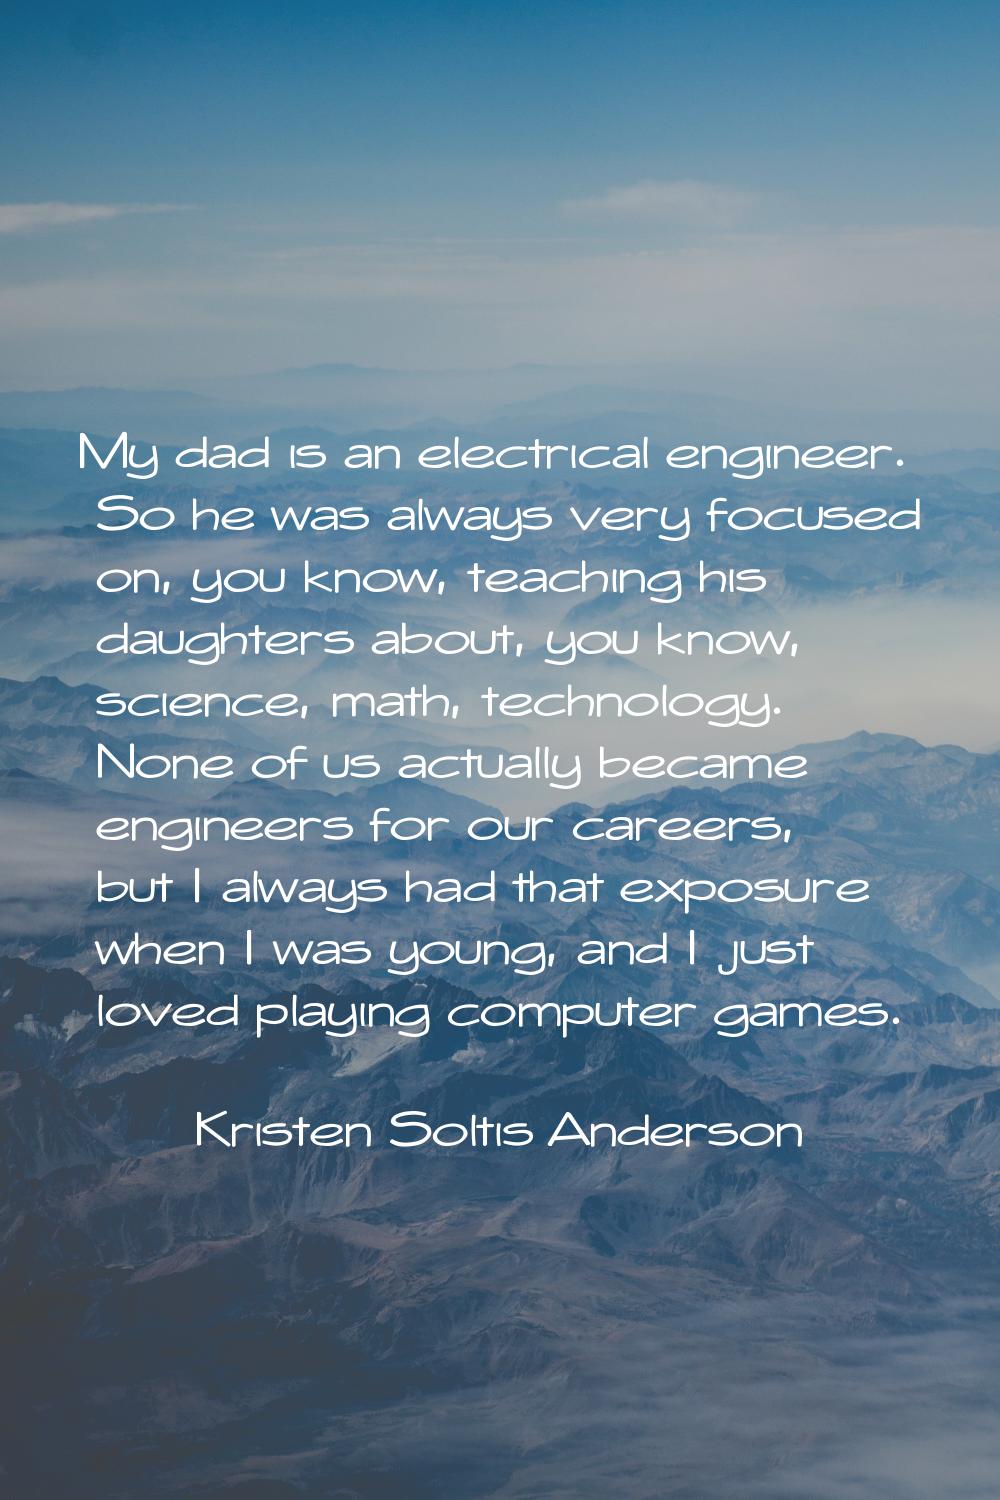 My dad is an electrical engineer. So he was always very focused on, you know, teaching his daughter